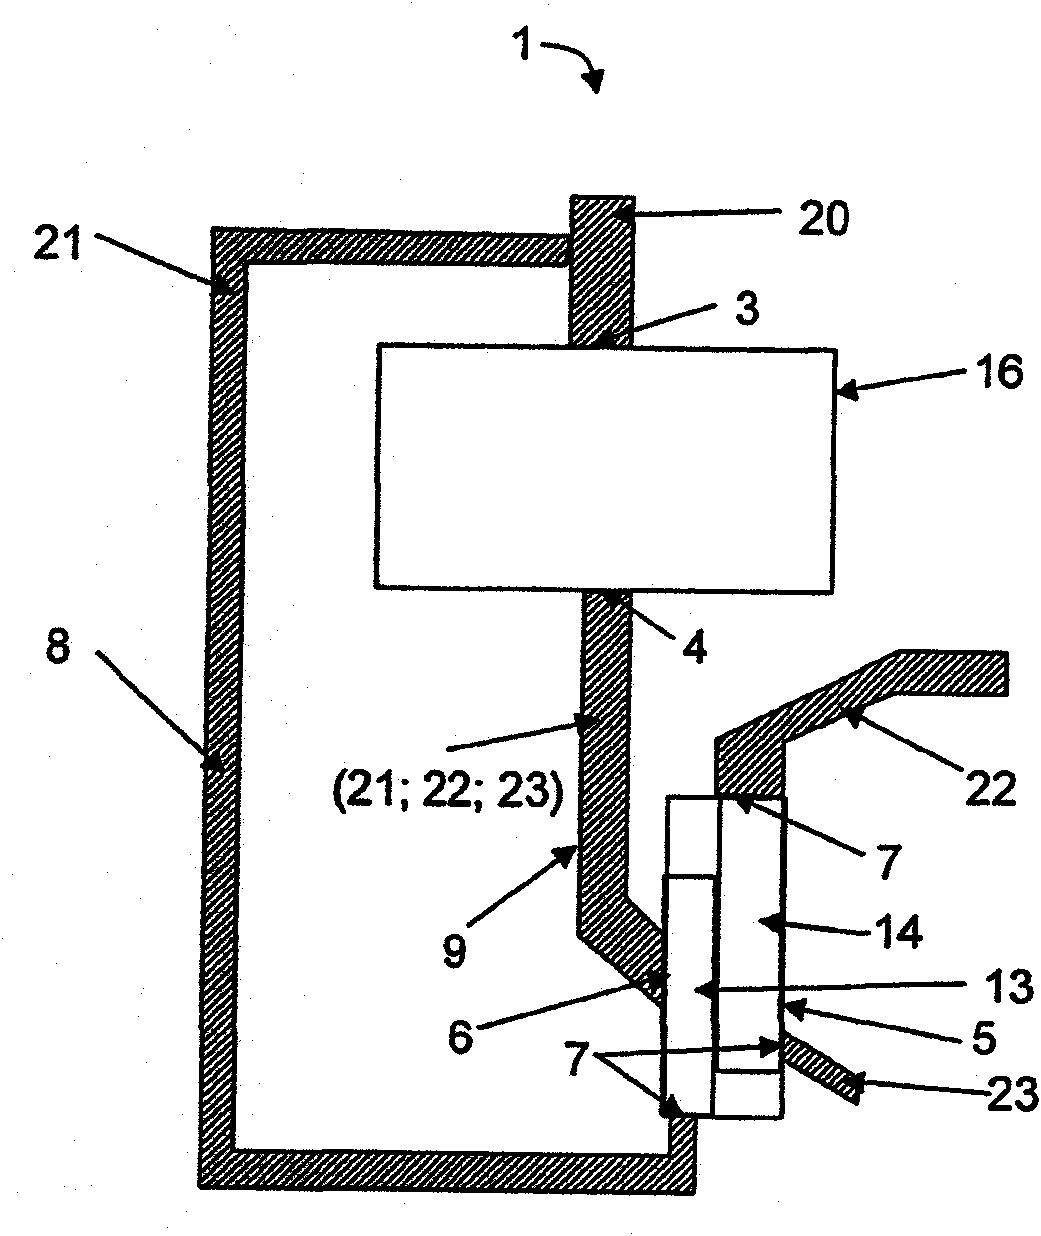 Apparatus and method for producing flour and/or semolina